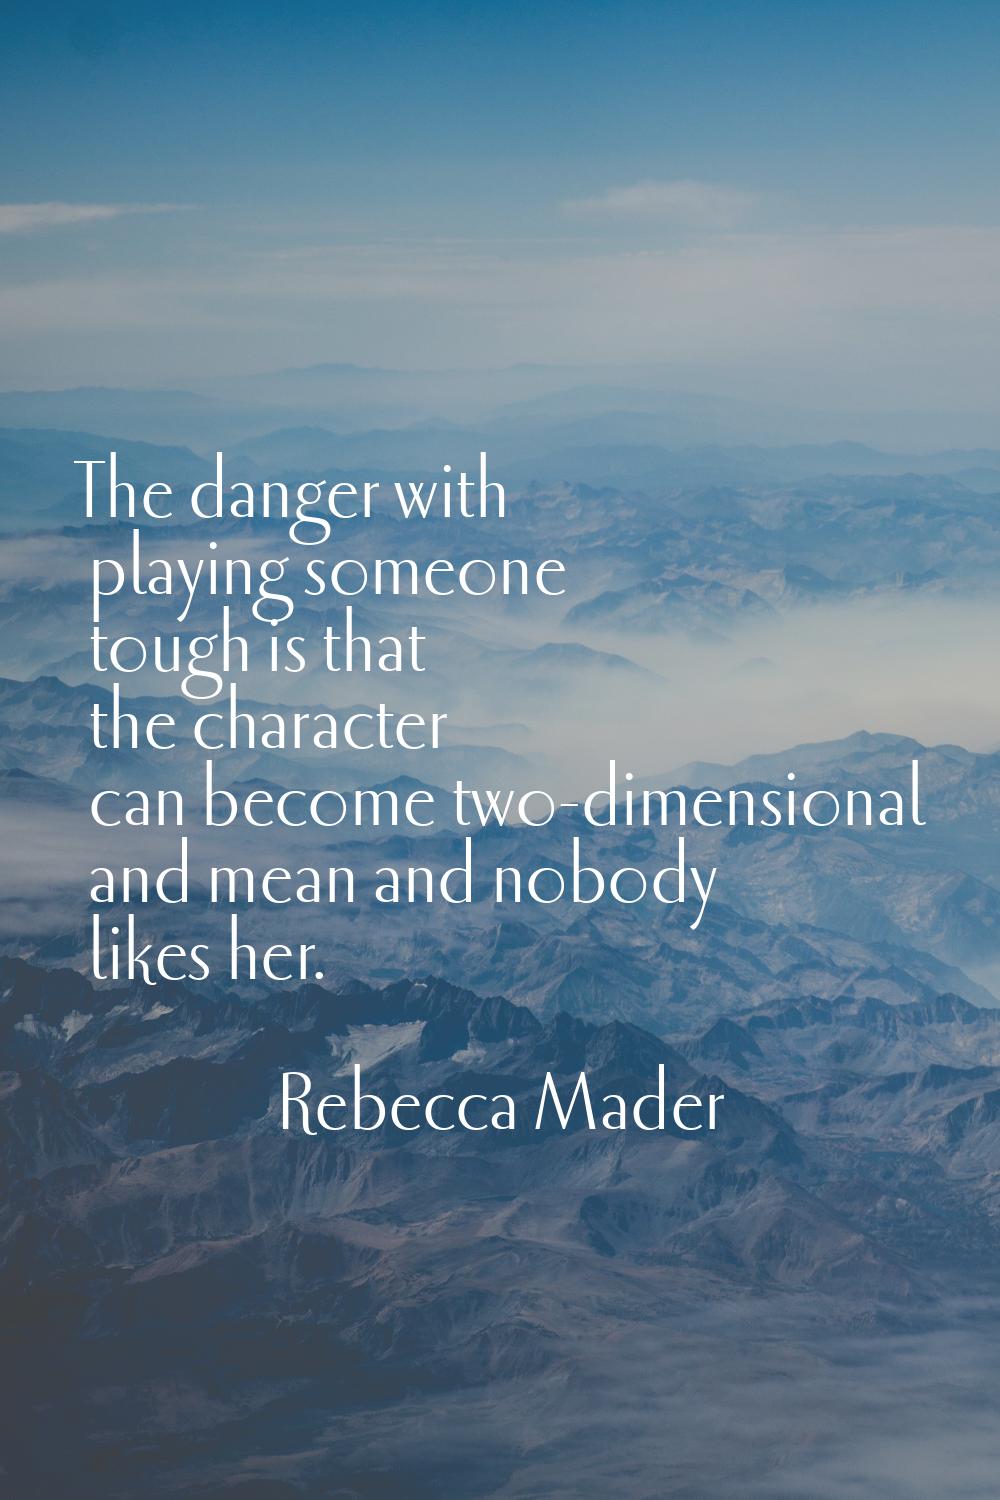 The danger with playing someone tough is that the character can become two-dimensional and mean and